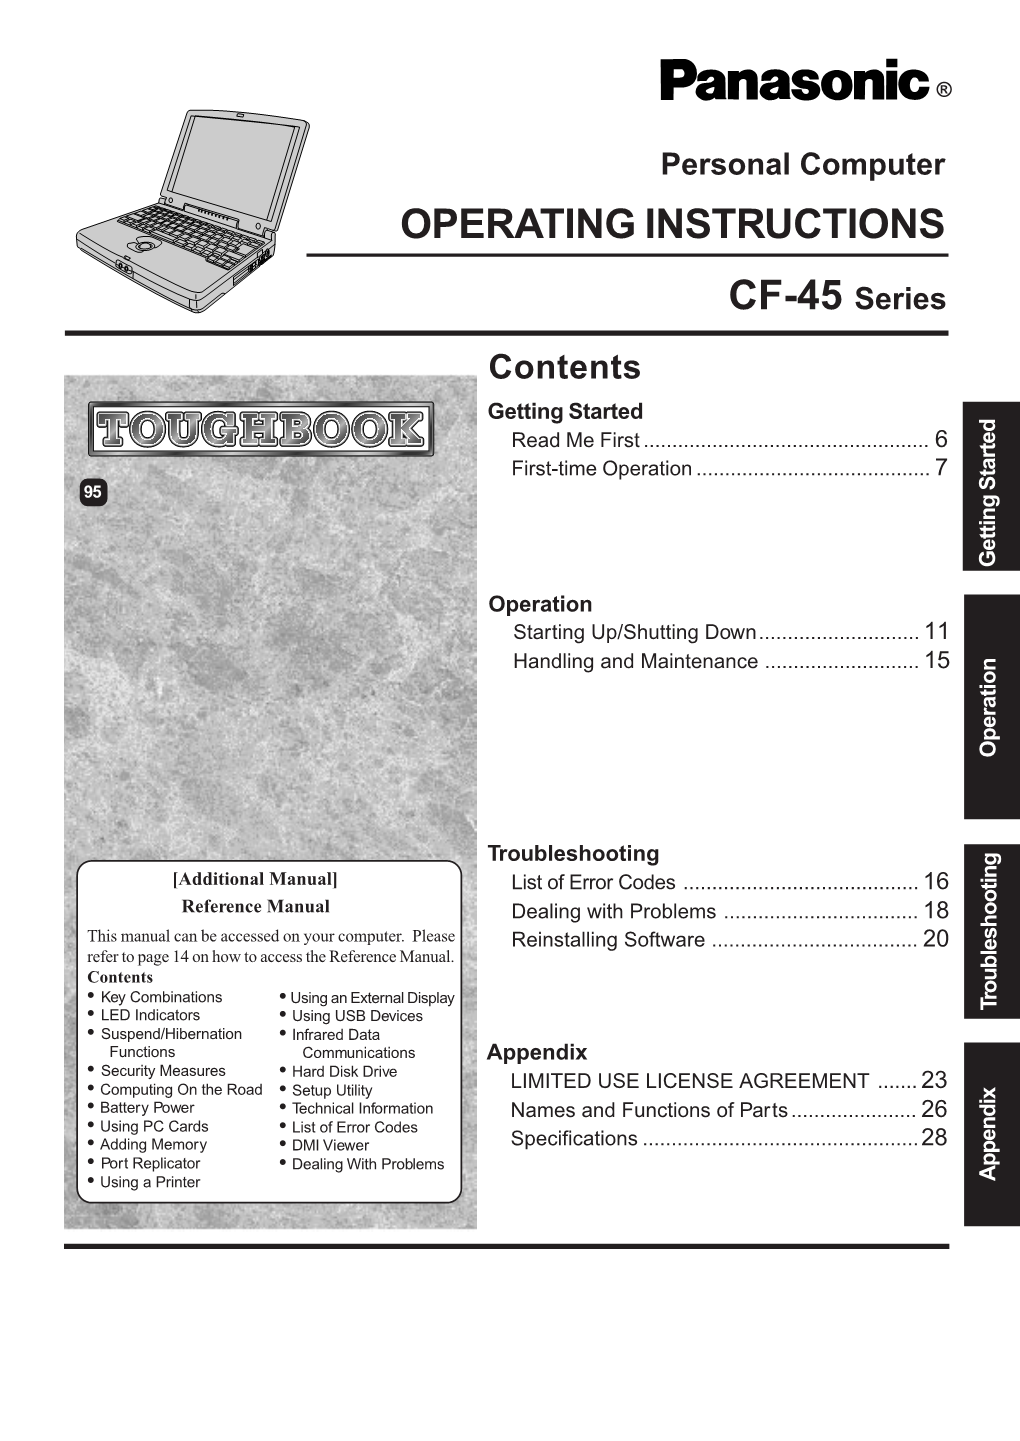 CF-45 Series OPERATING INSTRUCTIONS